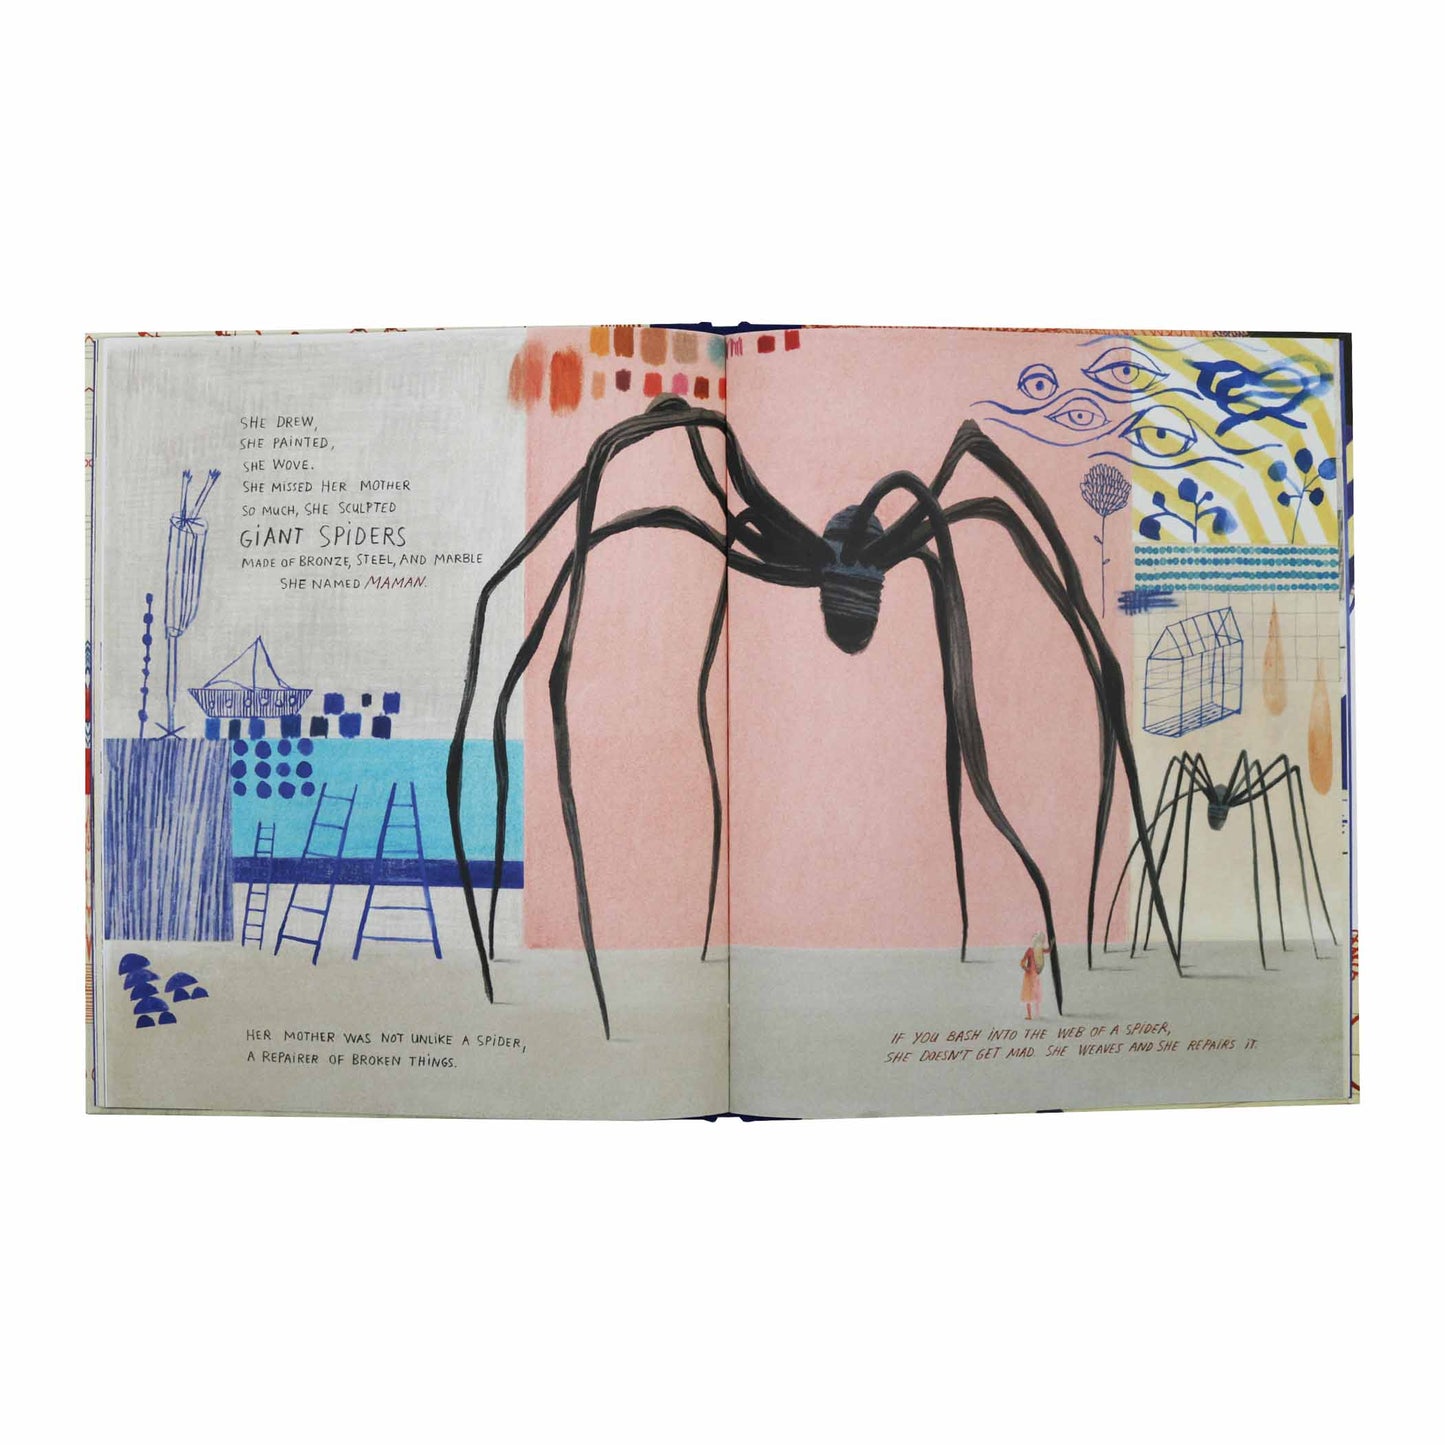 louise bourgeois made giant spiders and wasn't sorry